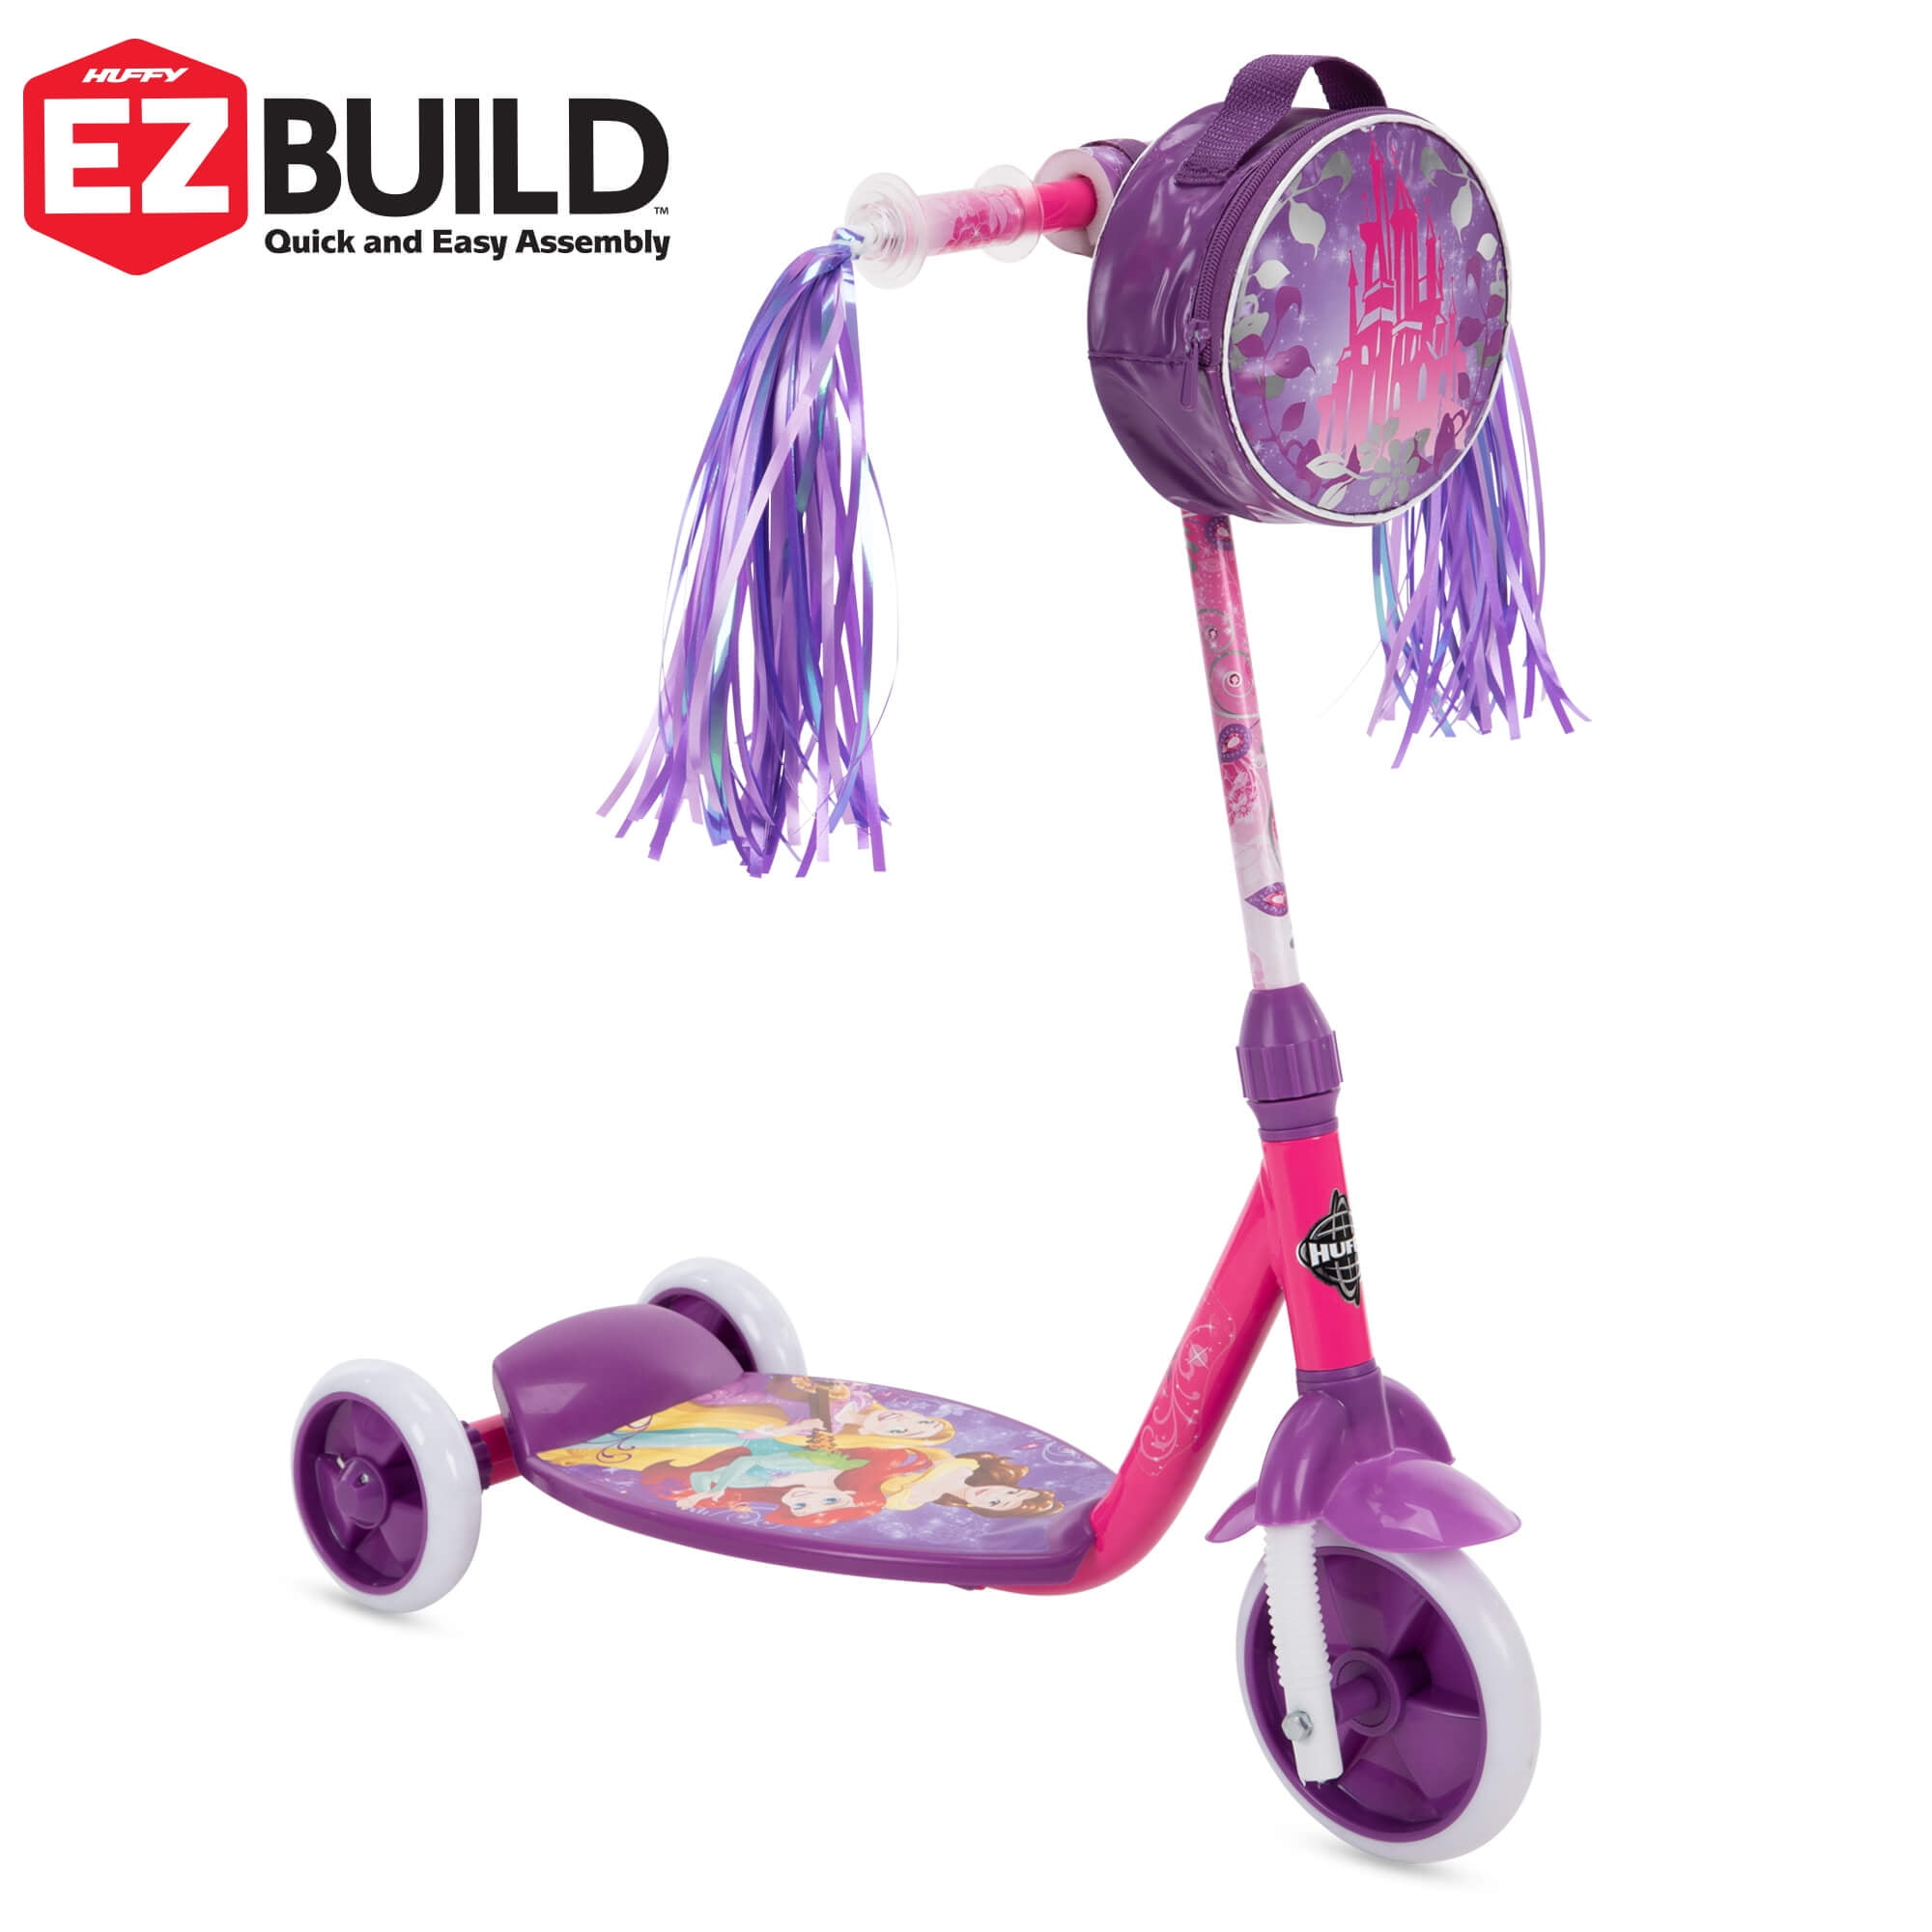 Preschool Scooter for Girls by Huffy Disney Minnie 3 Wheel for sale online 